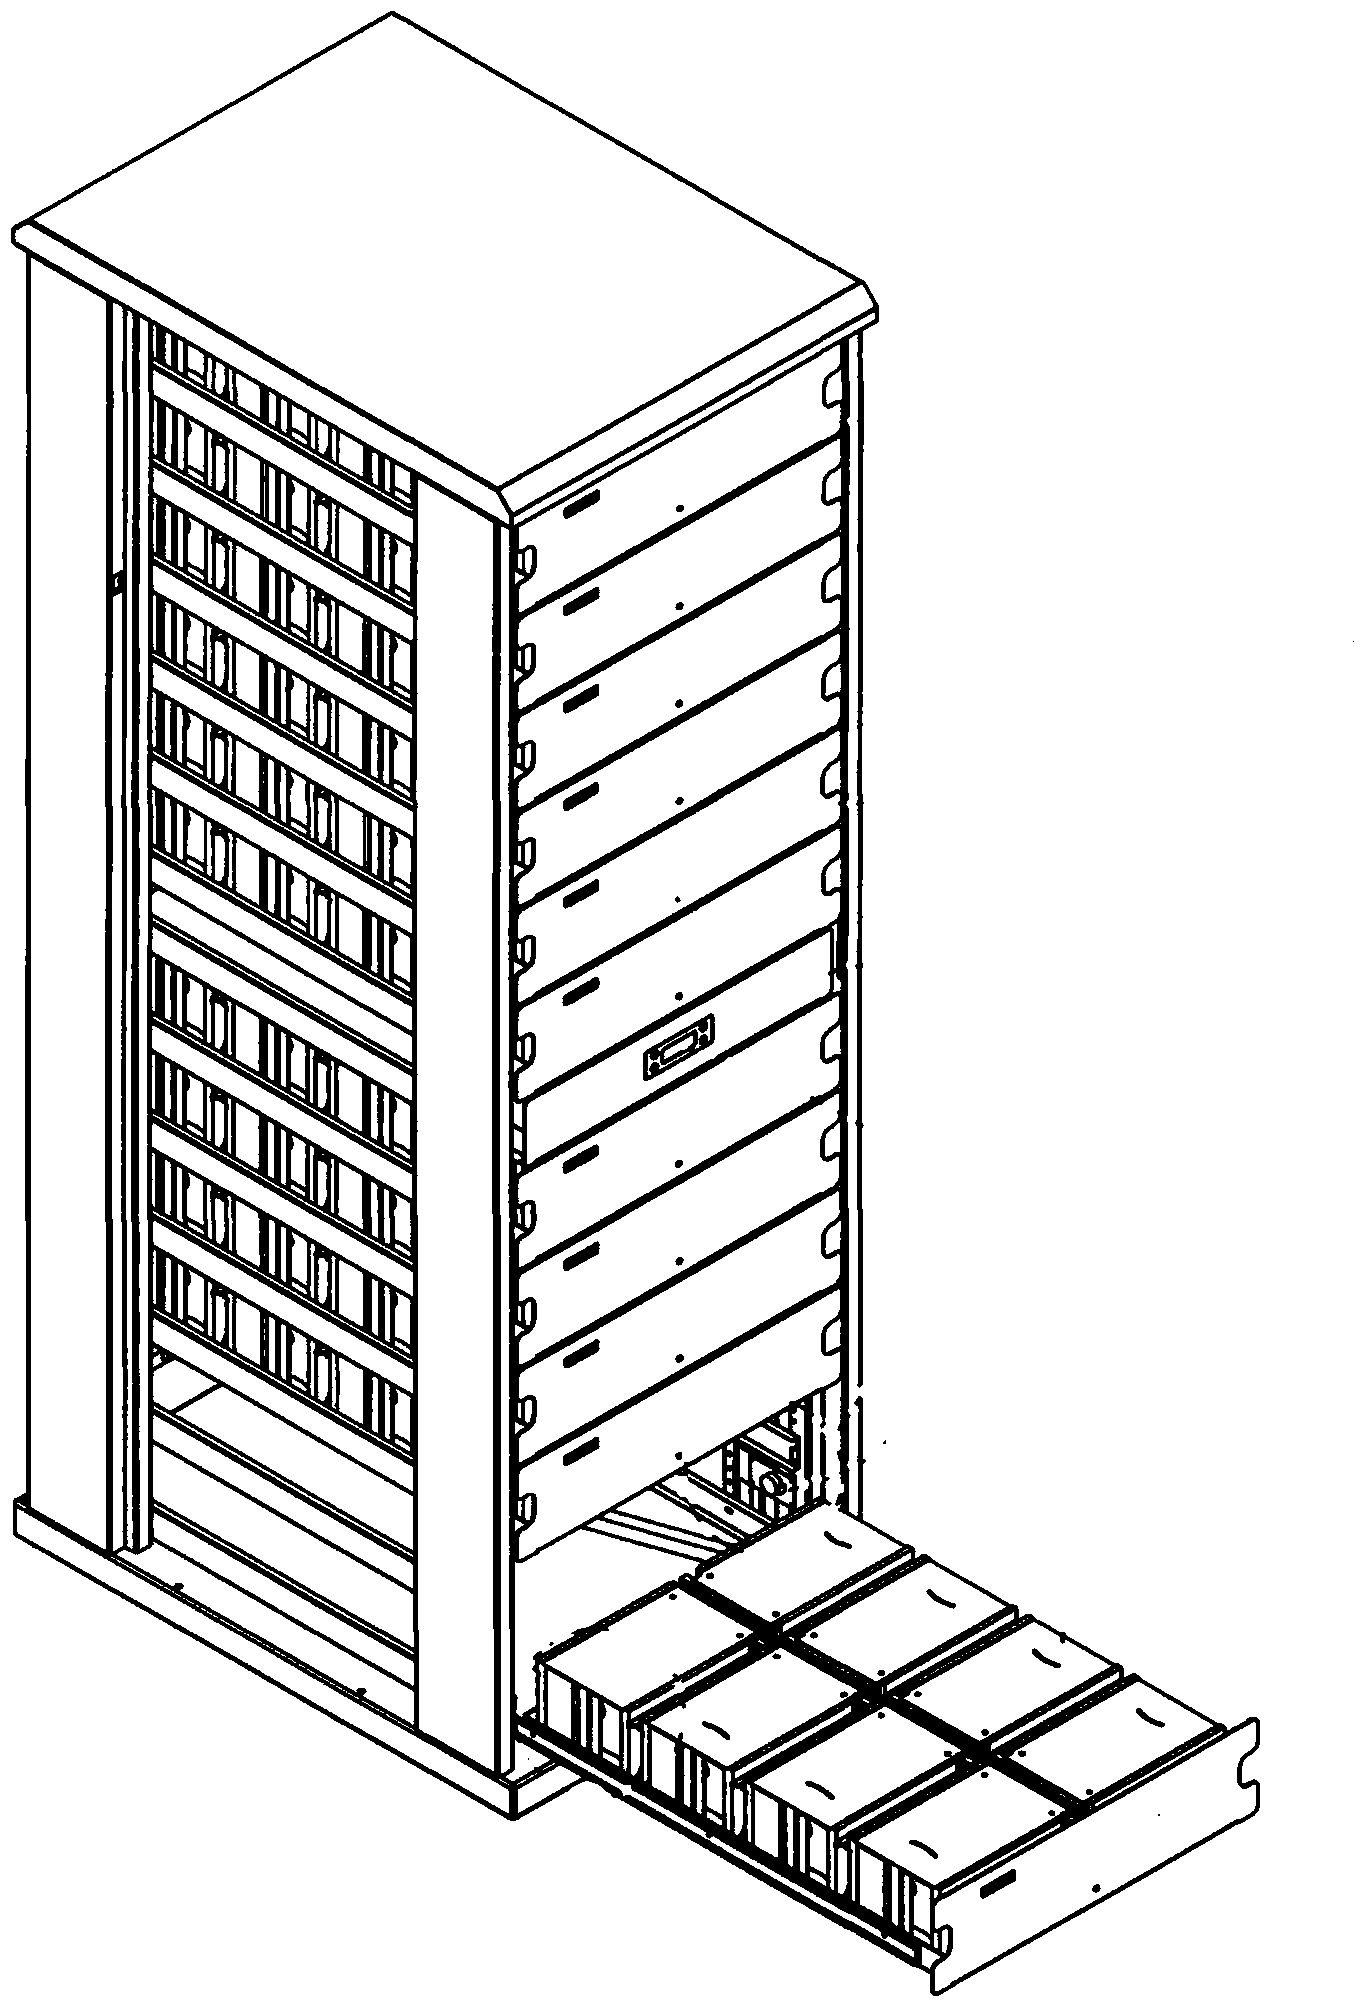 Data storage and read-write equipment based on off-line optical disk jukebox, method and system